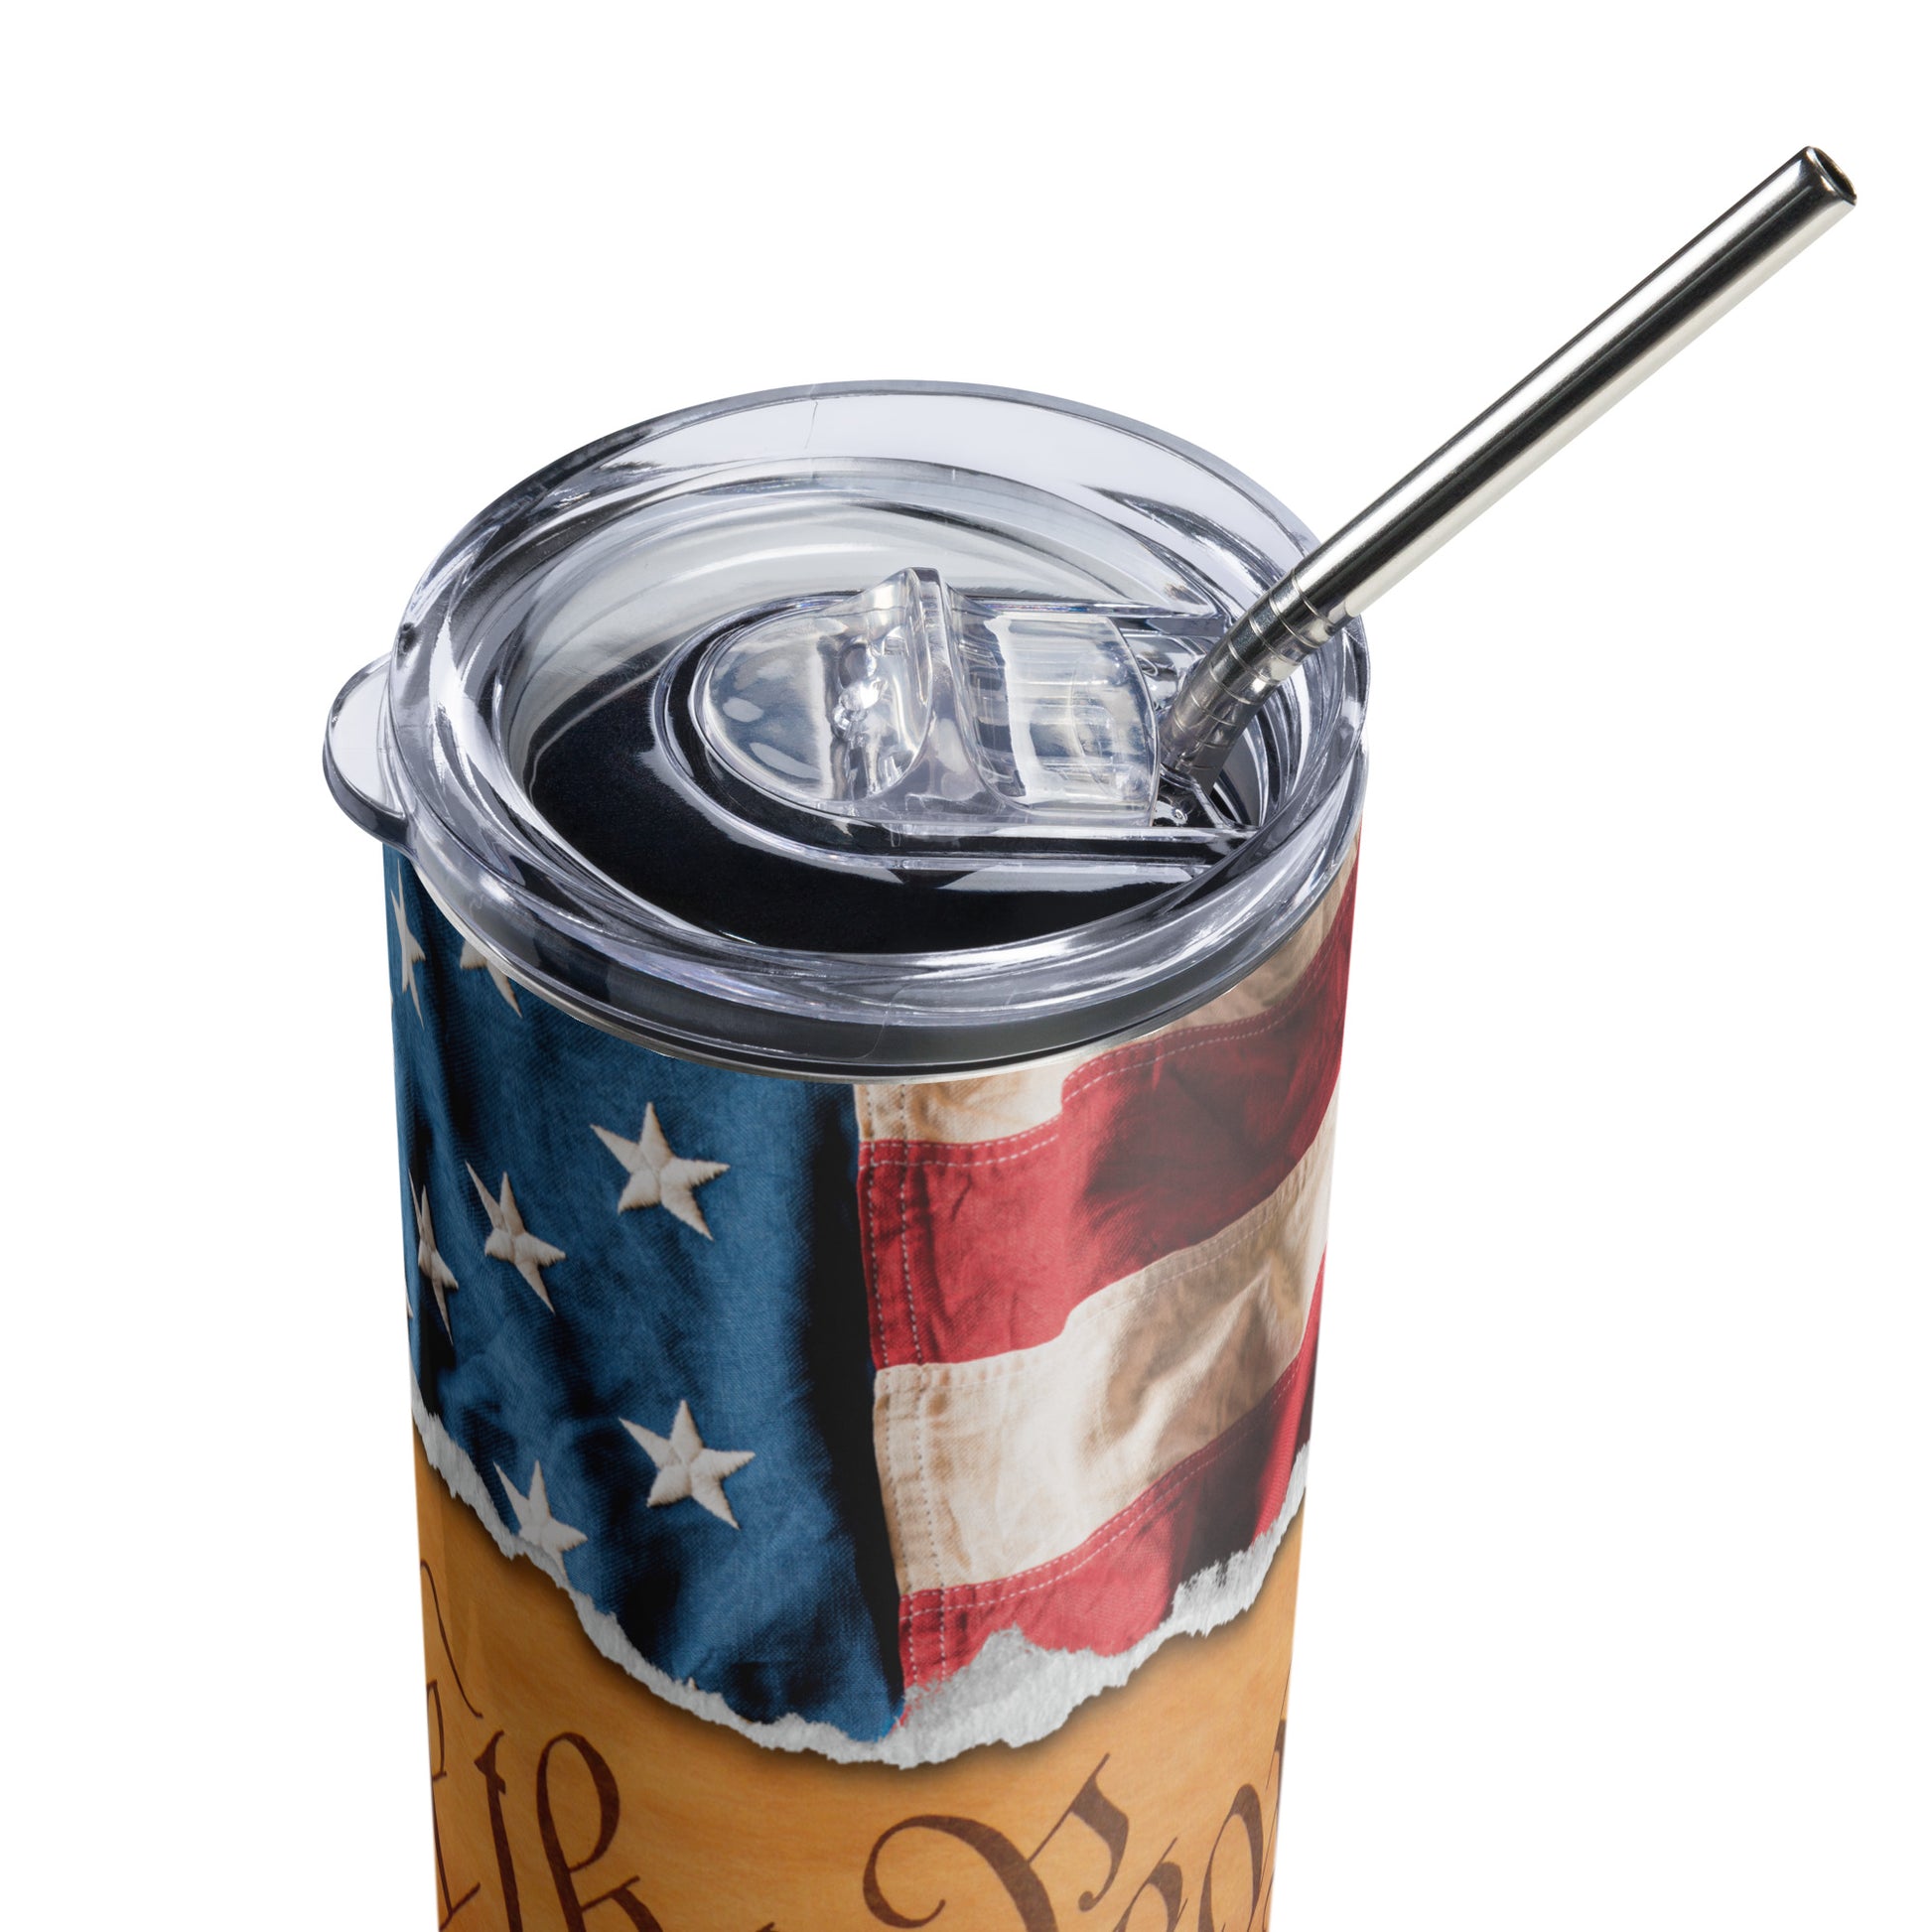 We the People of the United States Stainless steel tumbler CedarHill Country Market